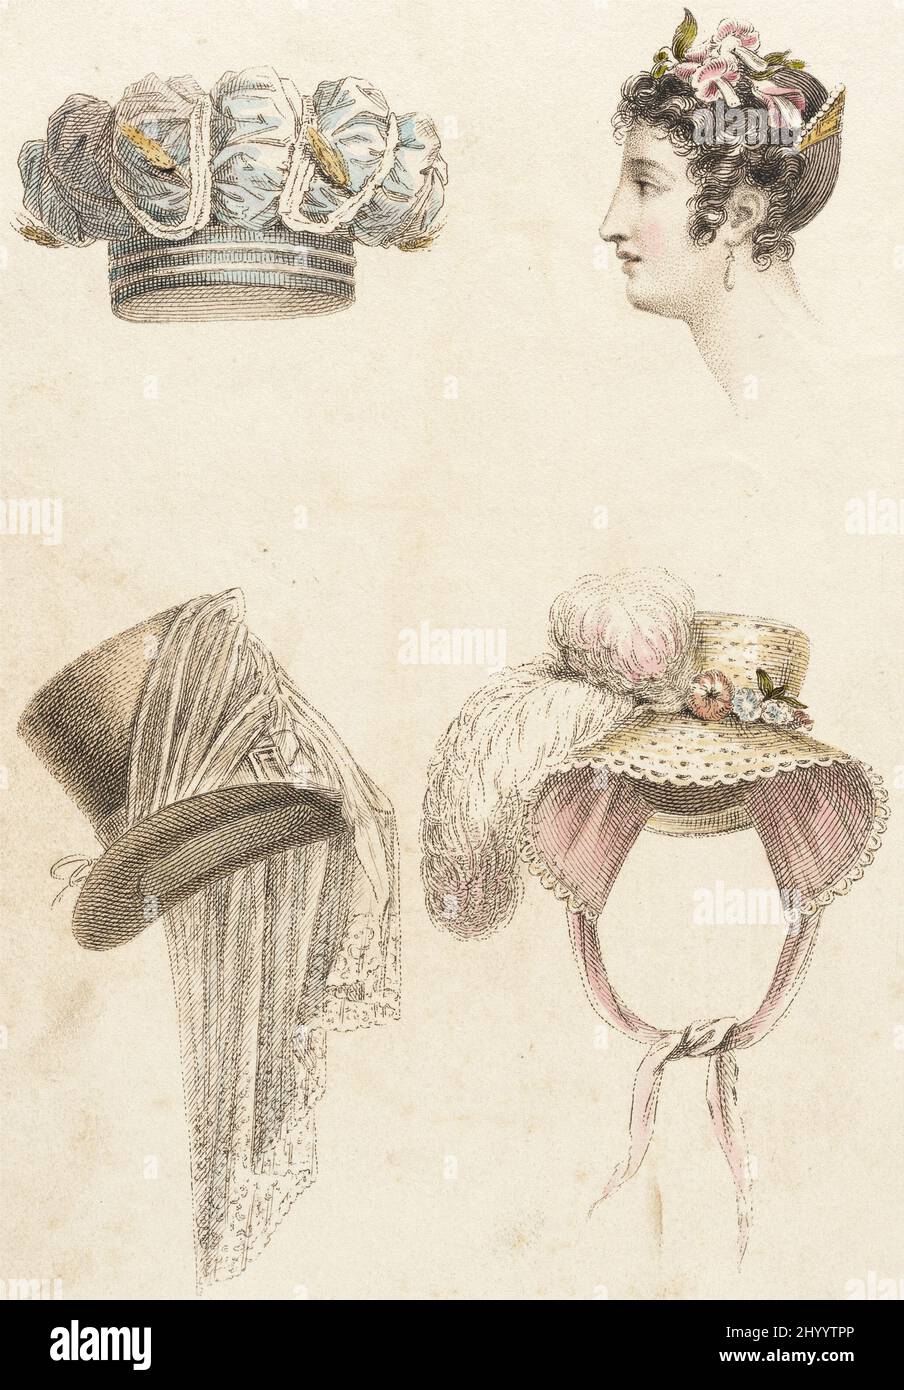 Fashion Plate, 'Head Dresses' for 'The Repository of Arts'. Rudolph Ackermann (England, London, 1764-1834). England, London, November 1, 1823. Prints; engravings. Hand-colored engraving on paper Stock Photo